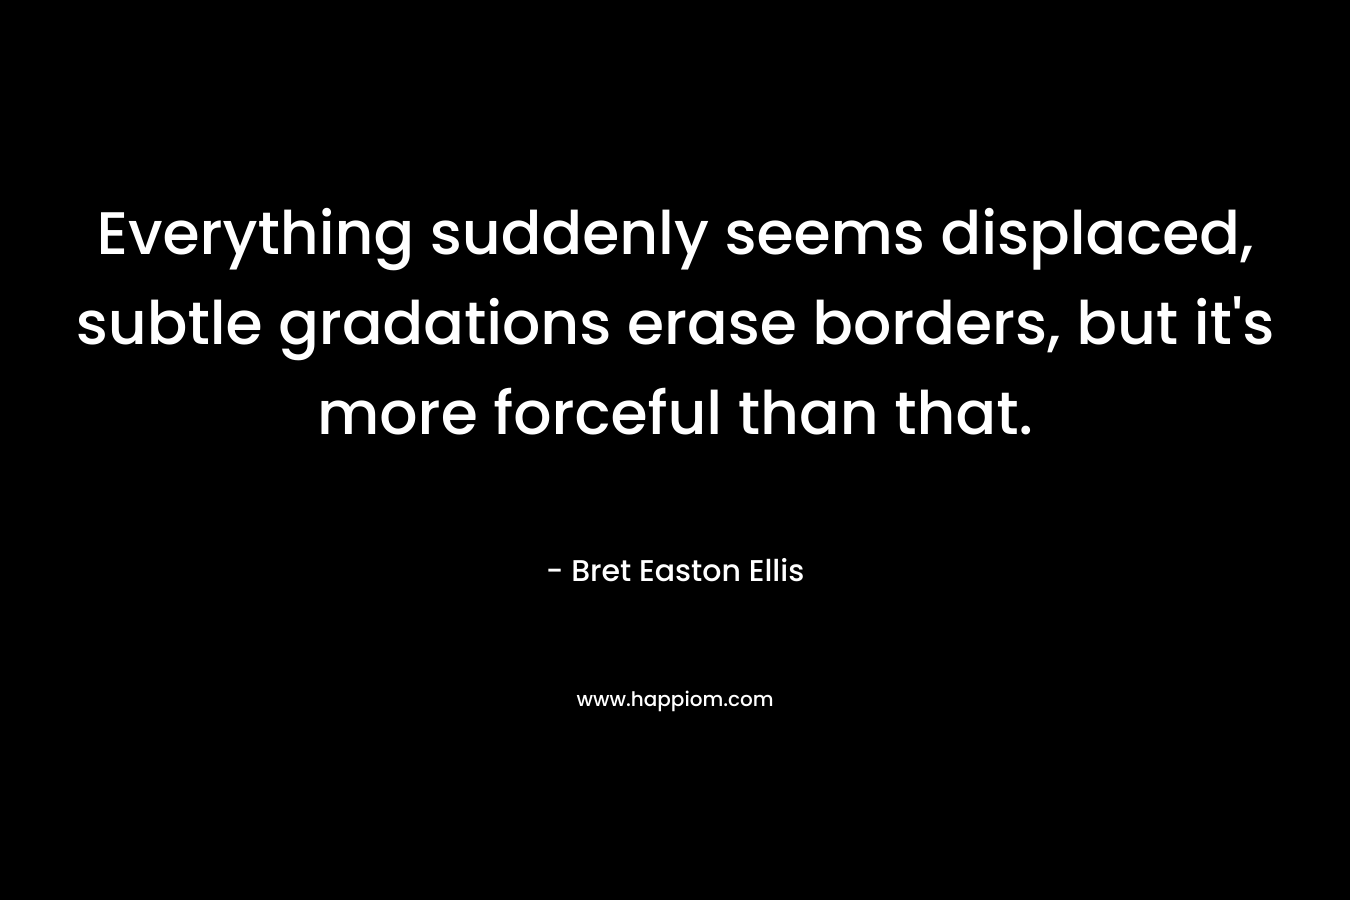 Everything suddenly seems displaced, subtle gradations erase borders, but it's more forceful than that.